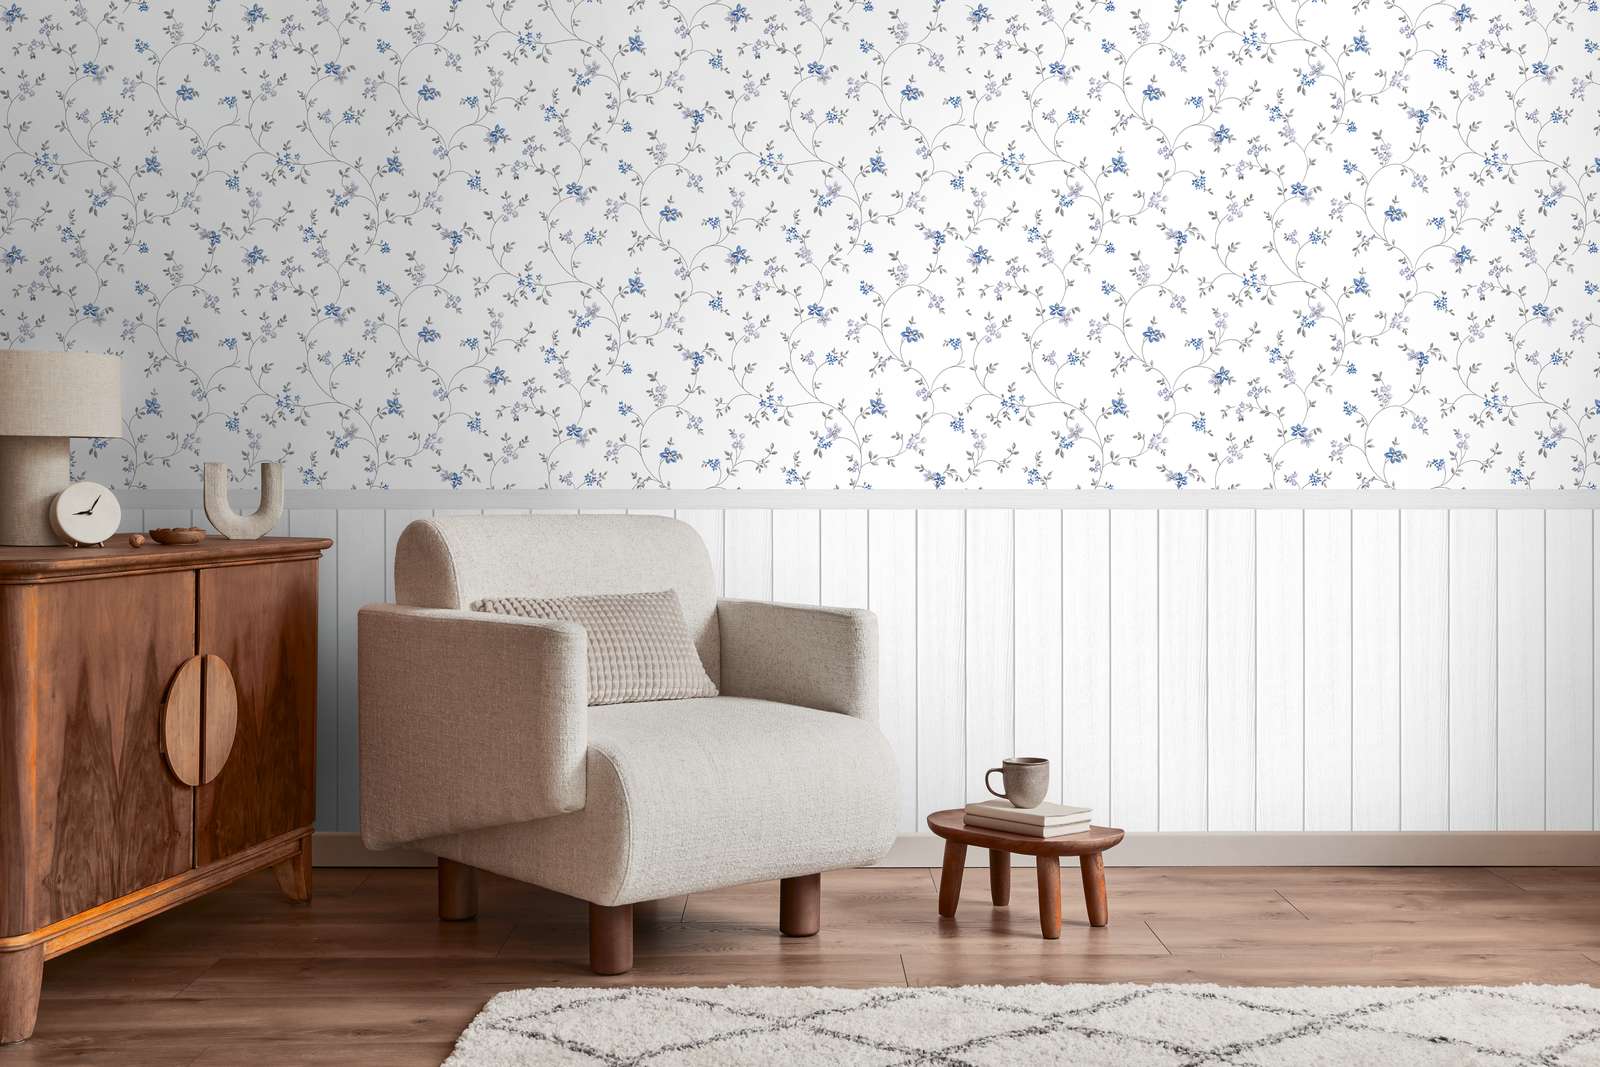             Non-woven motif wallpaper with wood-effect plinth border and floral pattern - white, grey, blue
        